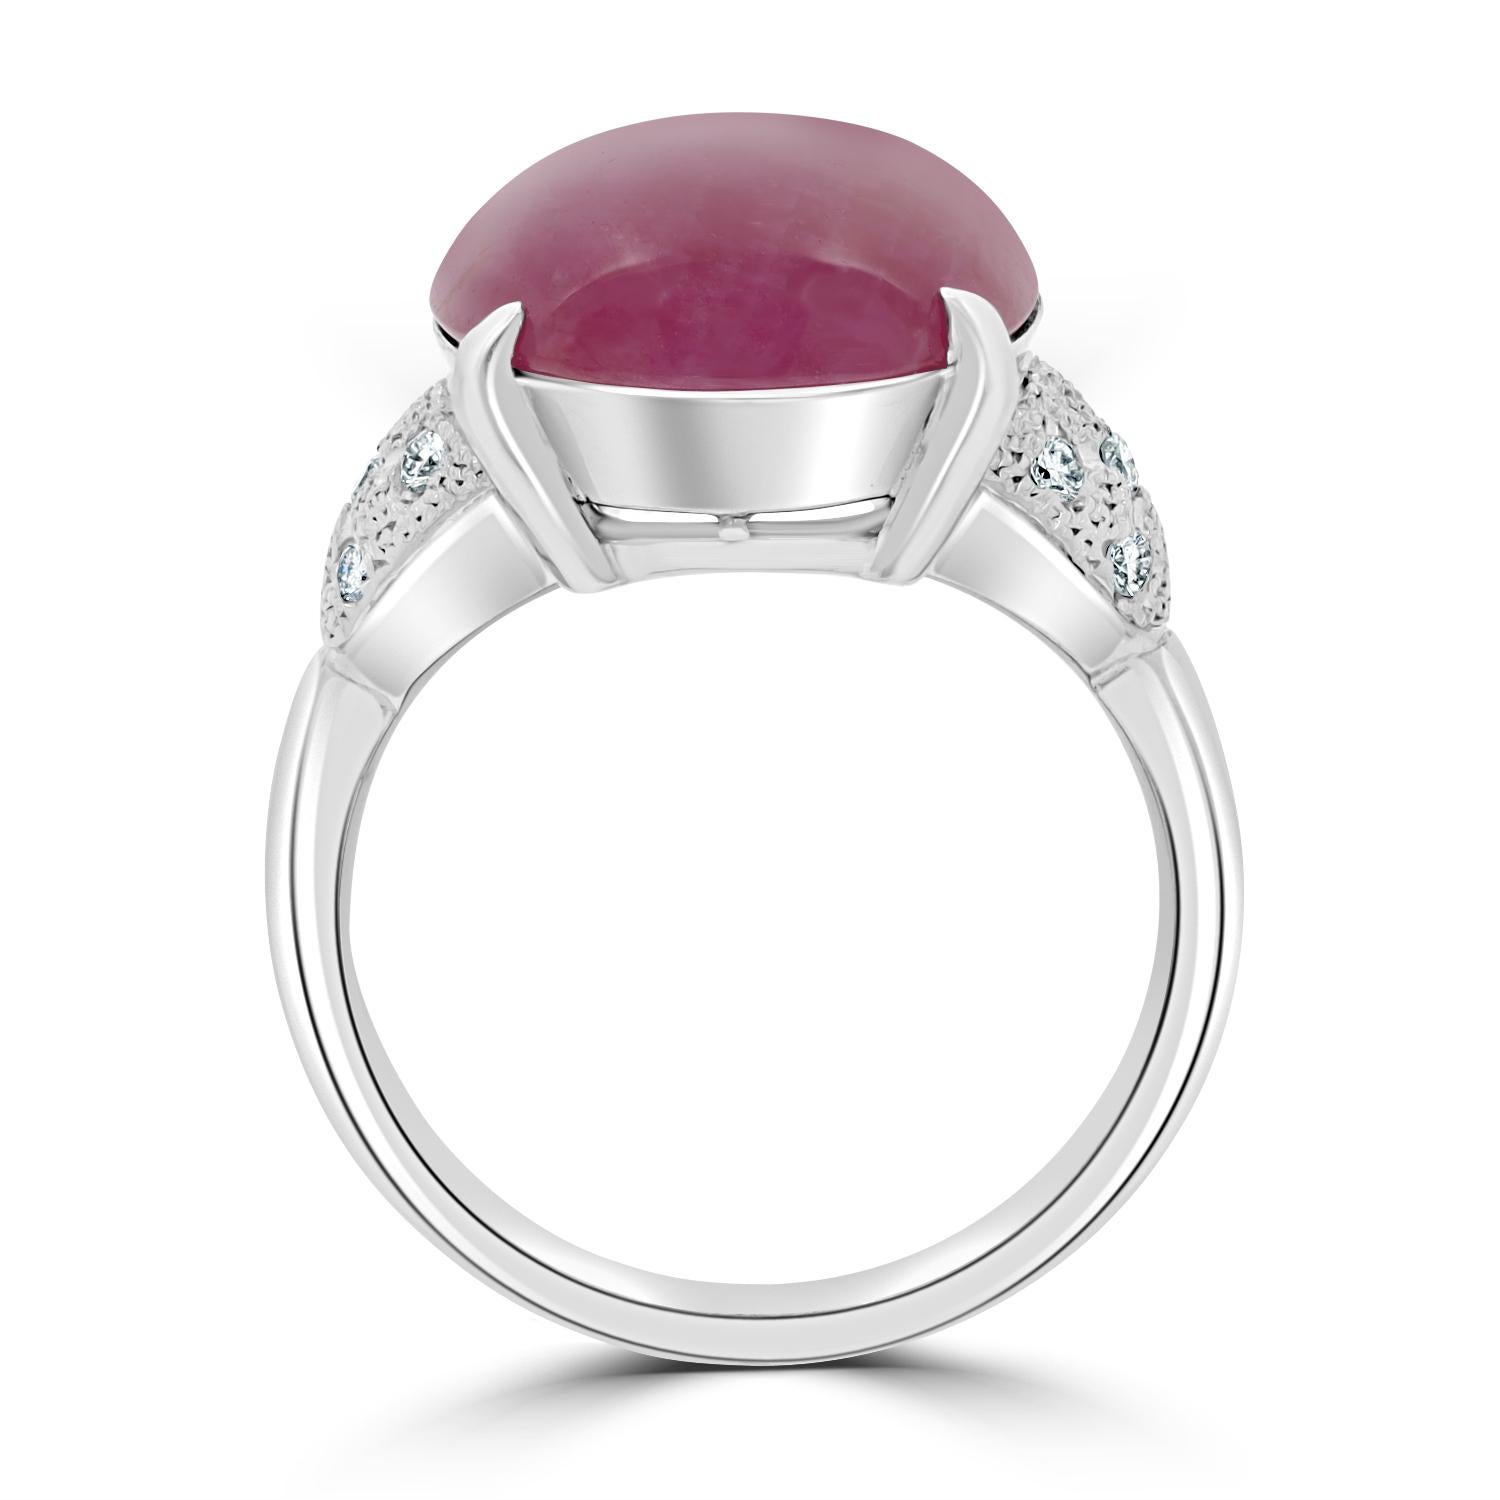 Designed from platinum, this elegant ring is set with an oval cut Star Ruby and surrounded by glittering Diamonds.